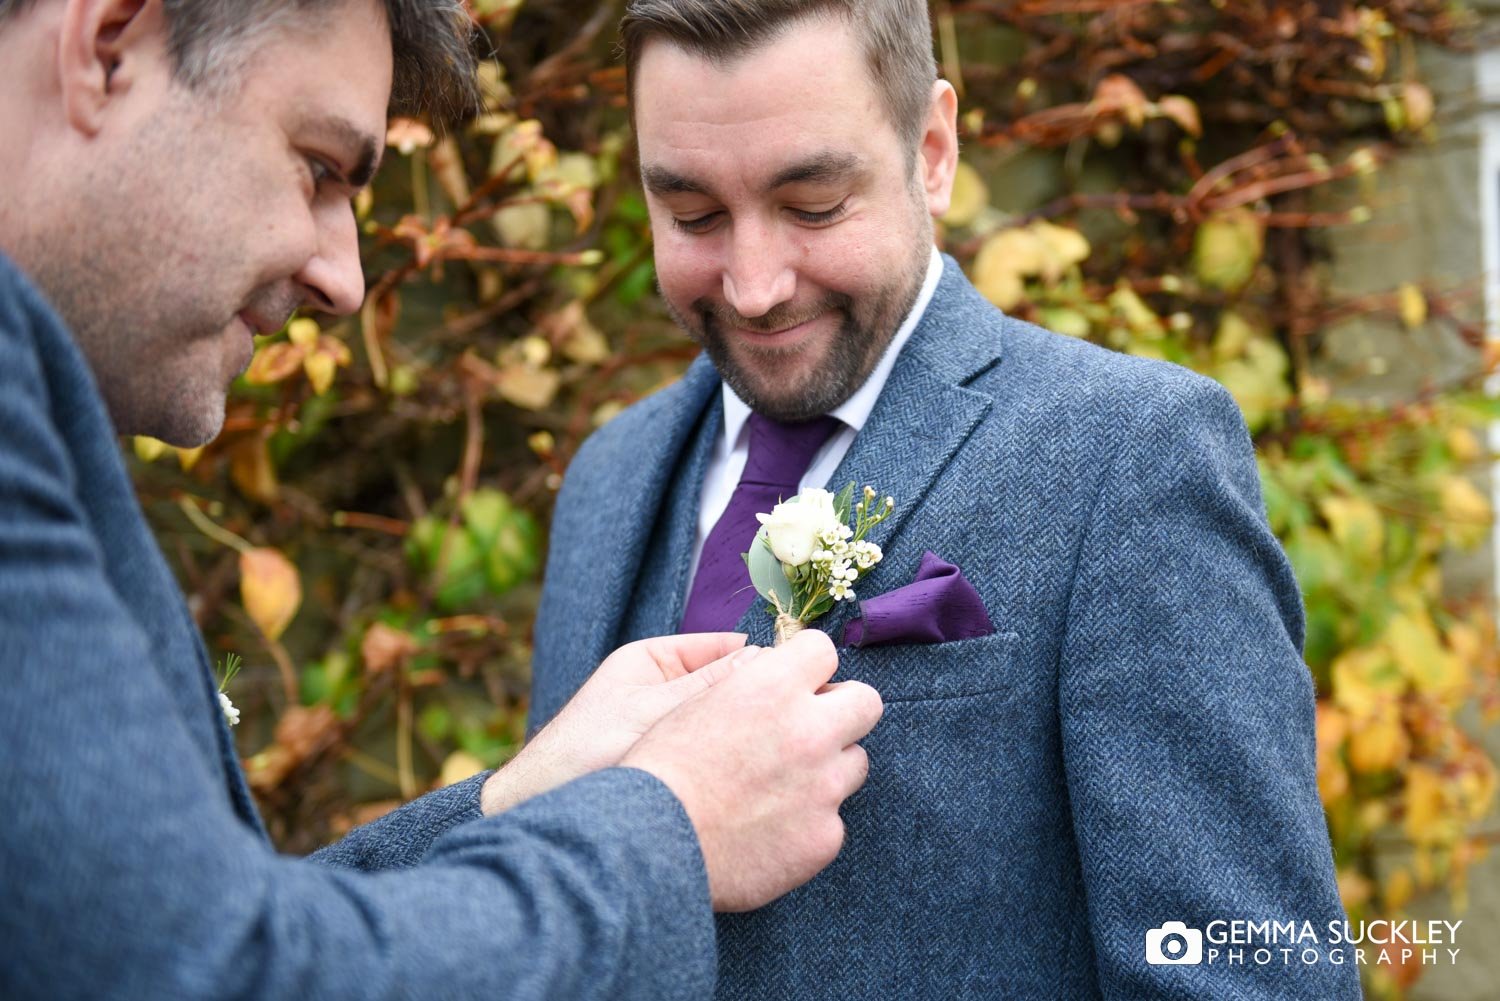 the best man putting on the groom's buttonhole